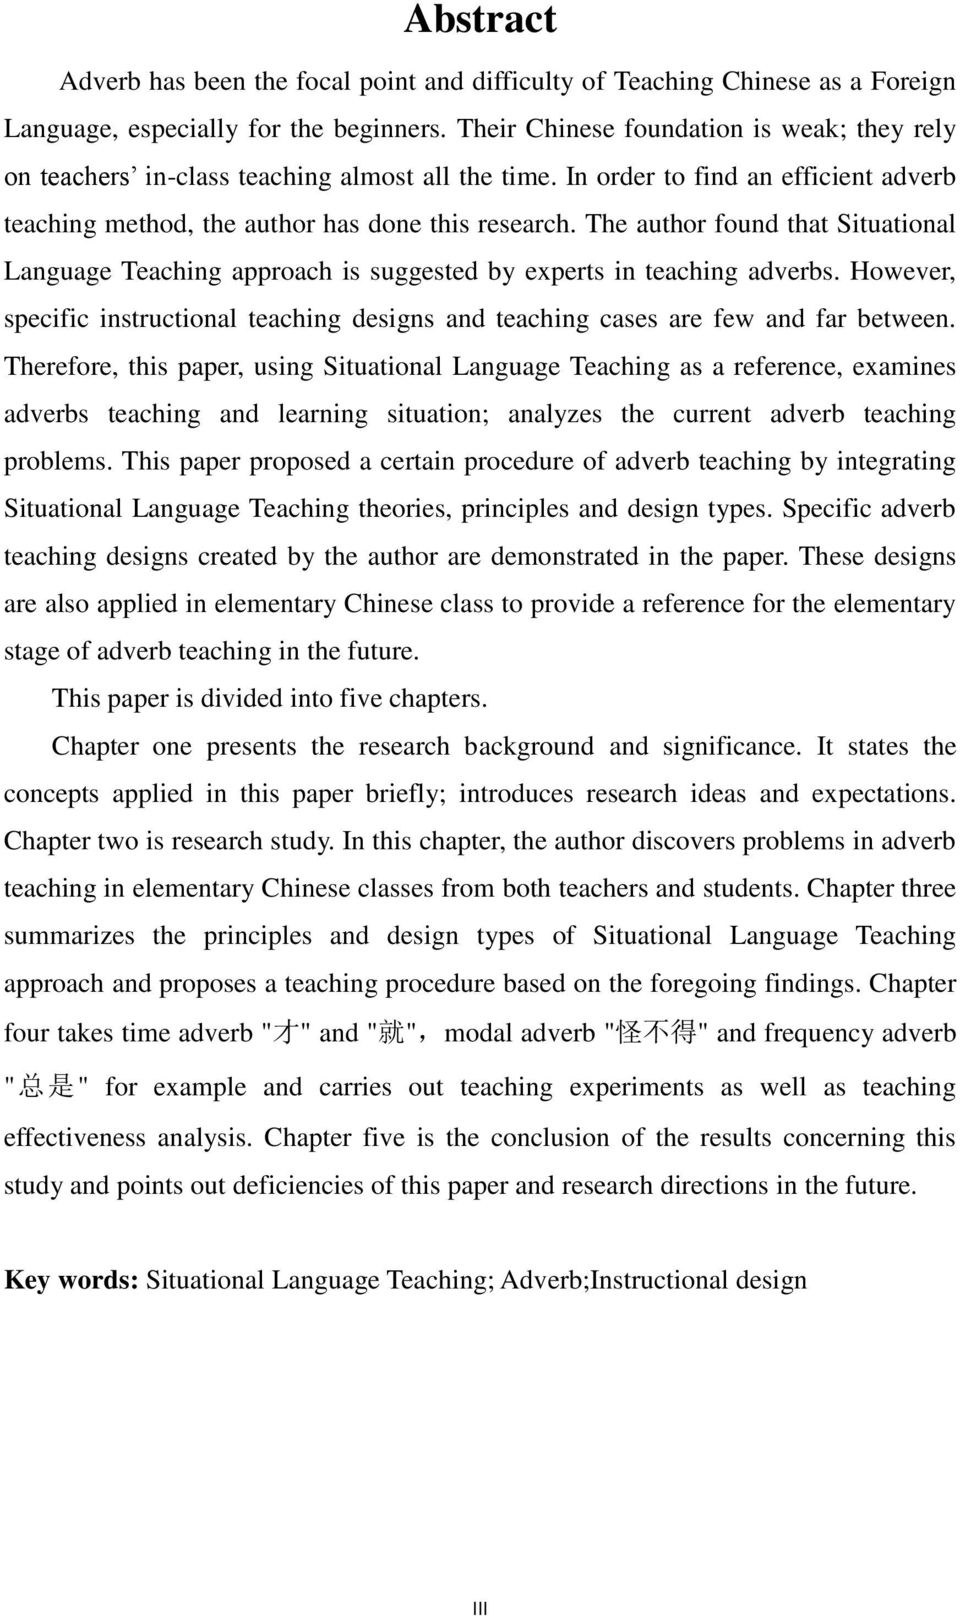 The author found that Situational Language Teaching approach is suggested by experts in teaching adverbs. However, specific instructional teaching designs and teaching cases are few and far between.